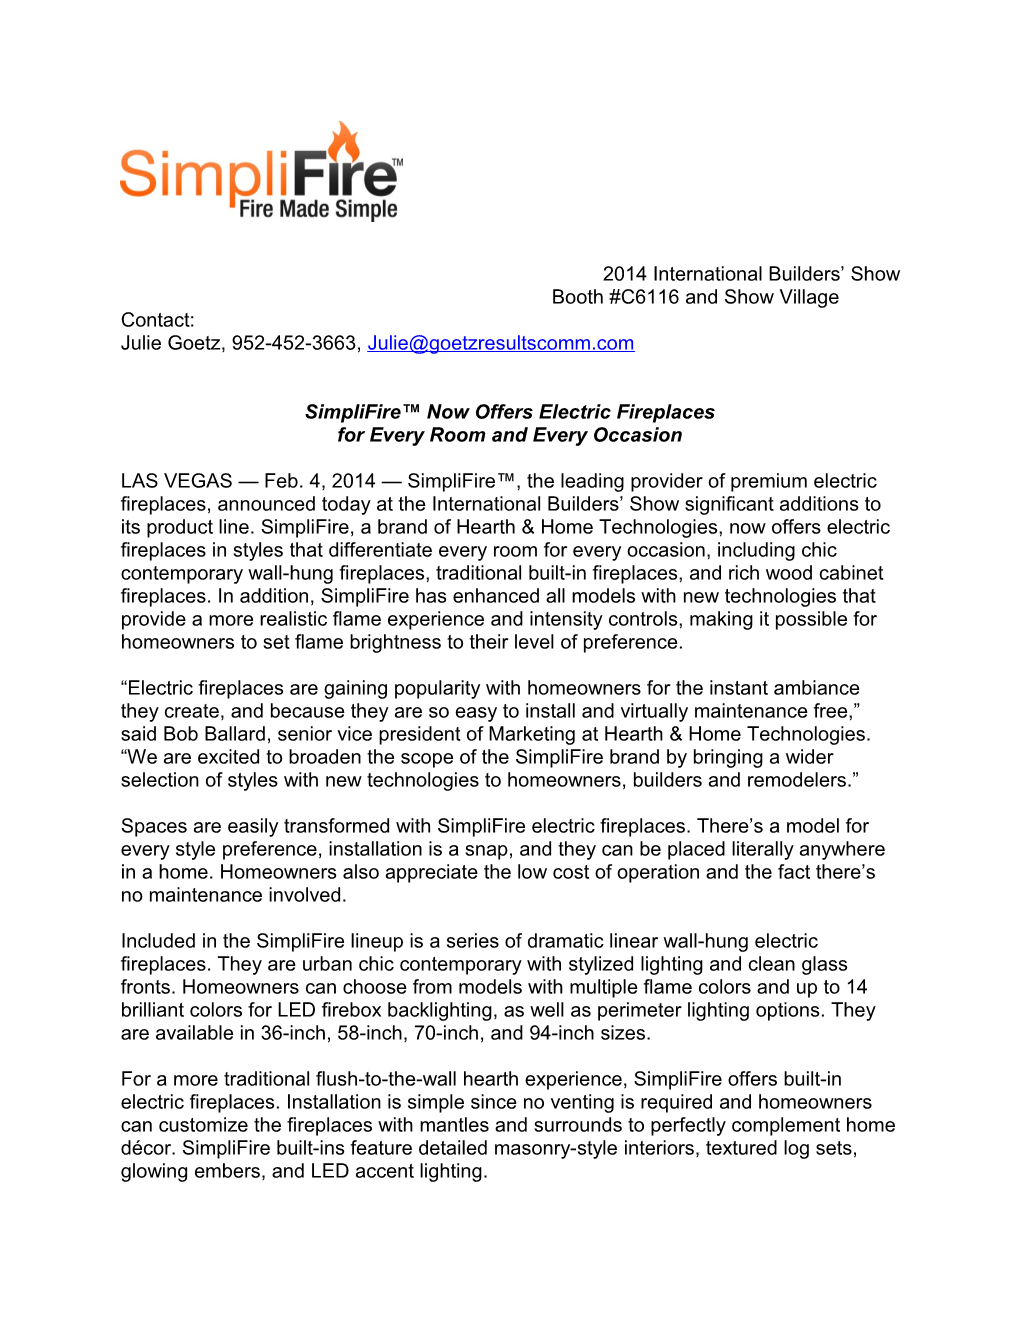 Simplifire Now Offers Electric Fireplaces